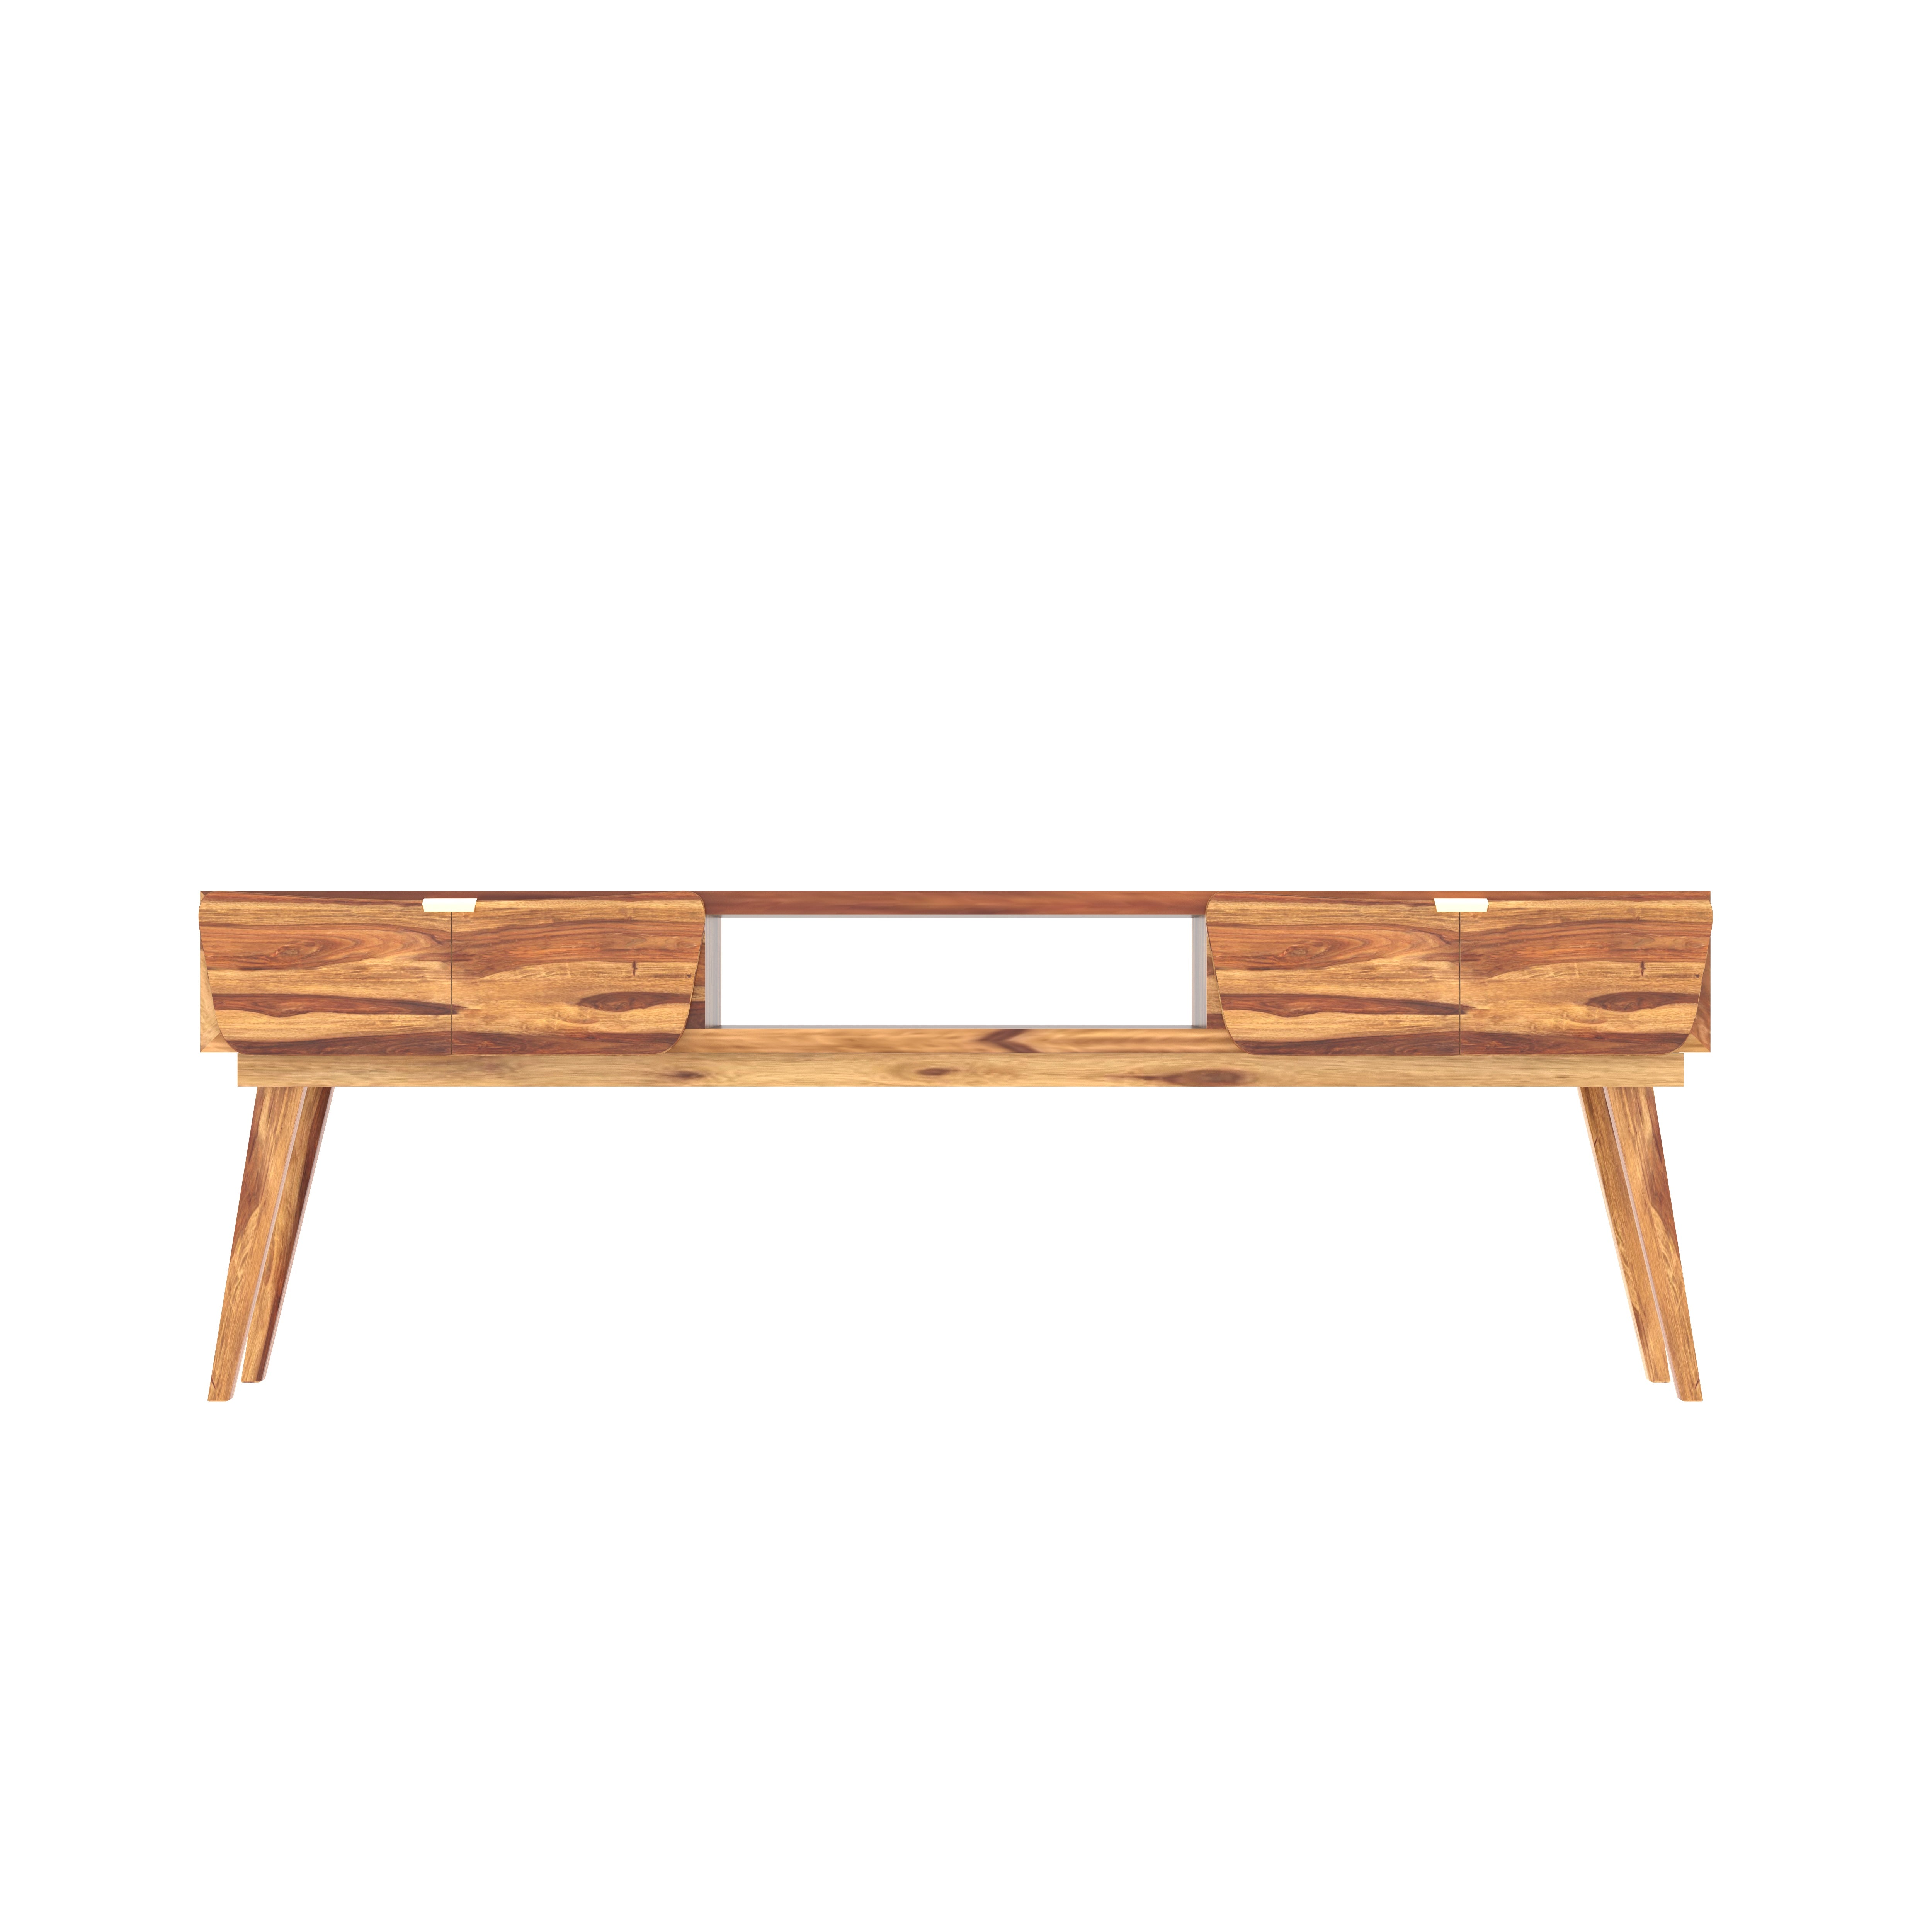 Aesthetic Marcoos Designed Wooden Handmade TV Stand Tv stand